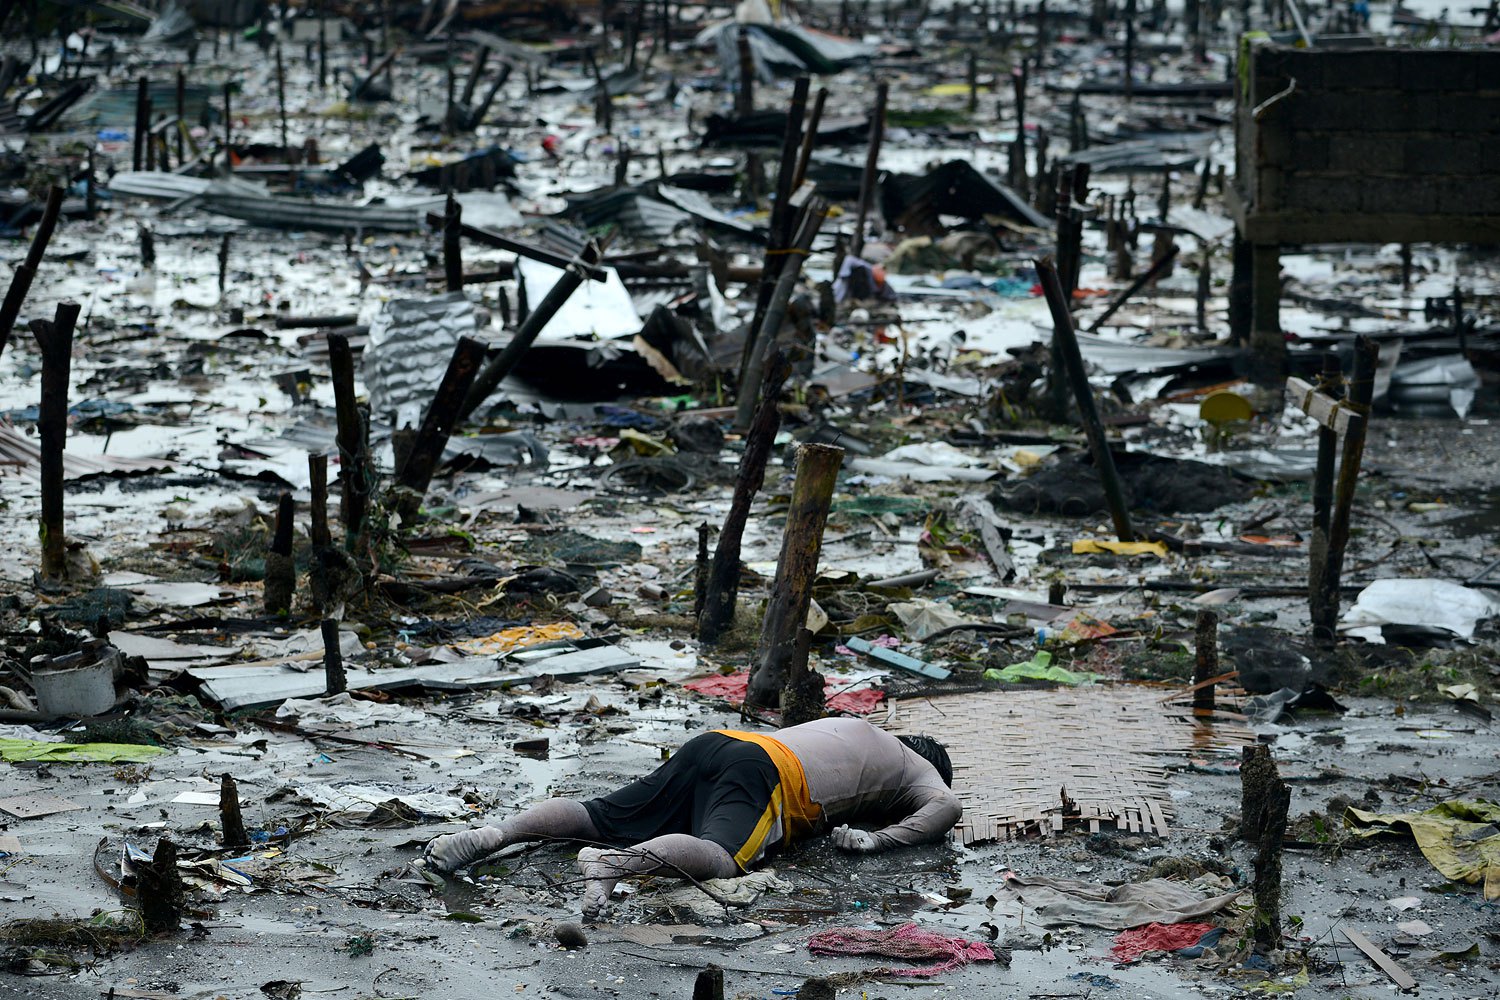 The body of a dead man is seen in Tacloban, in Leyte province, on Nov. 10, 2013, after Supertyphoon Haiyan swept over the Philippines